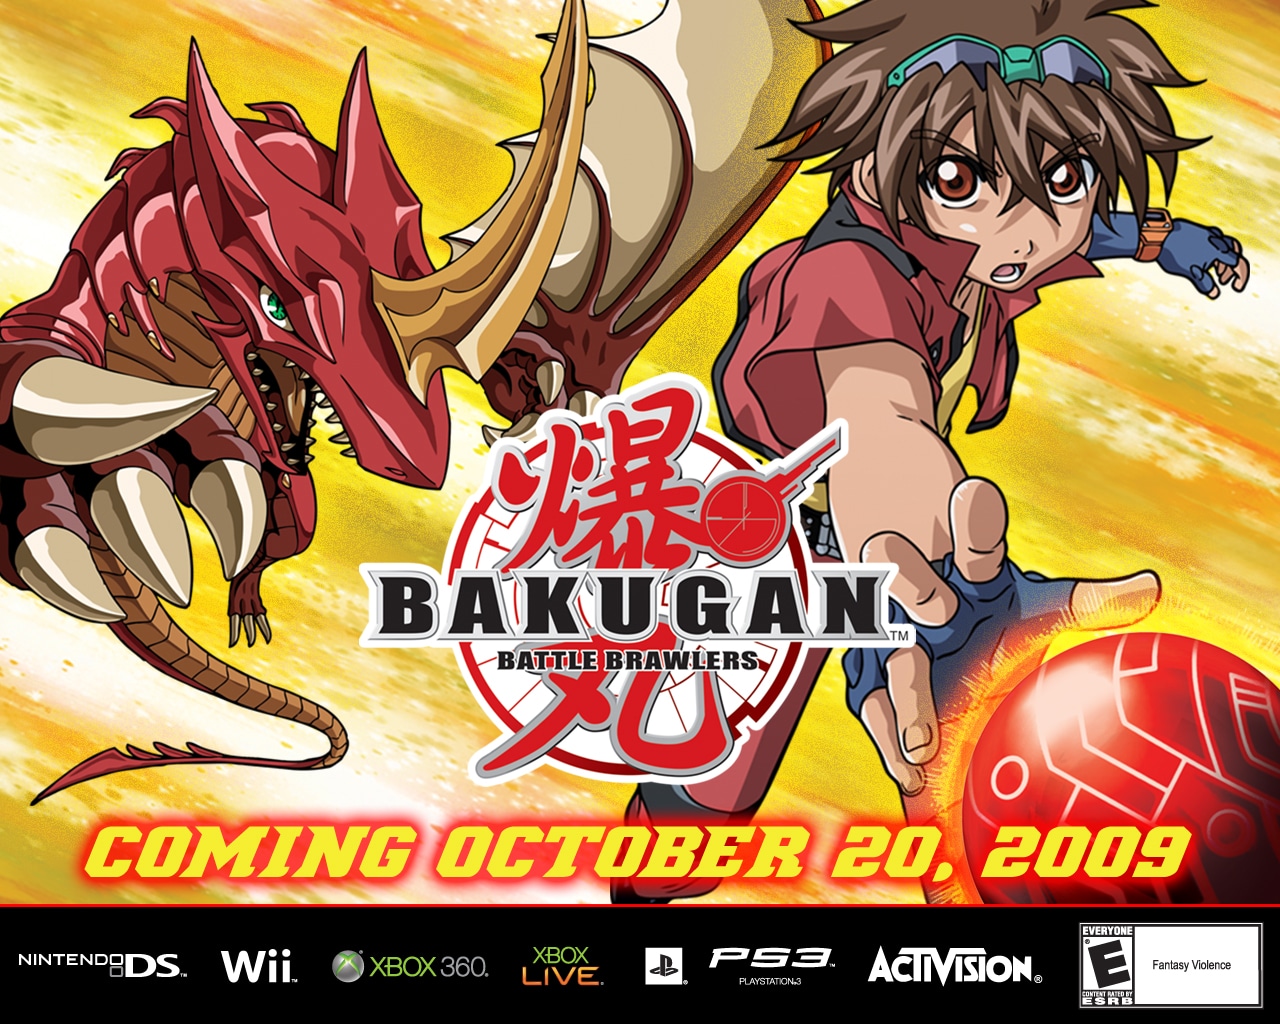 Welcome to the Bakugan Battle Brawlers wallpapers page!